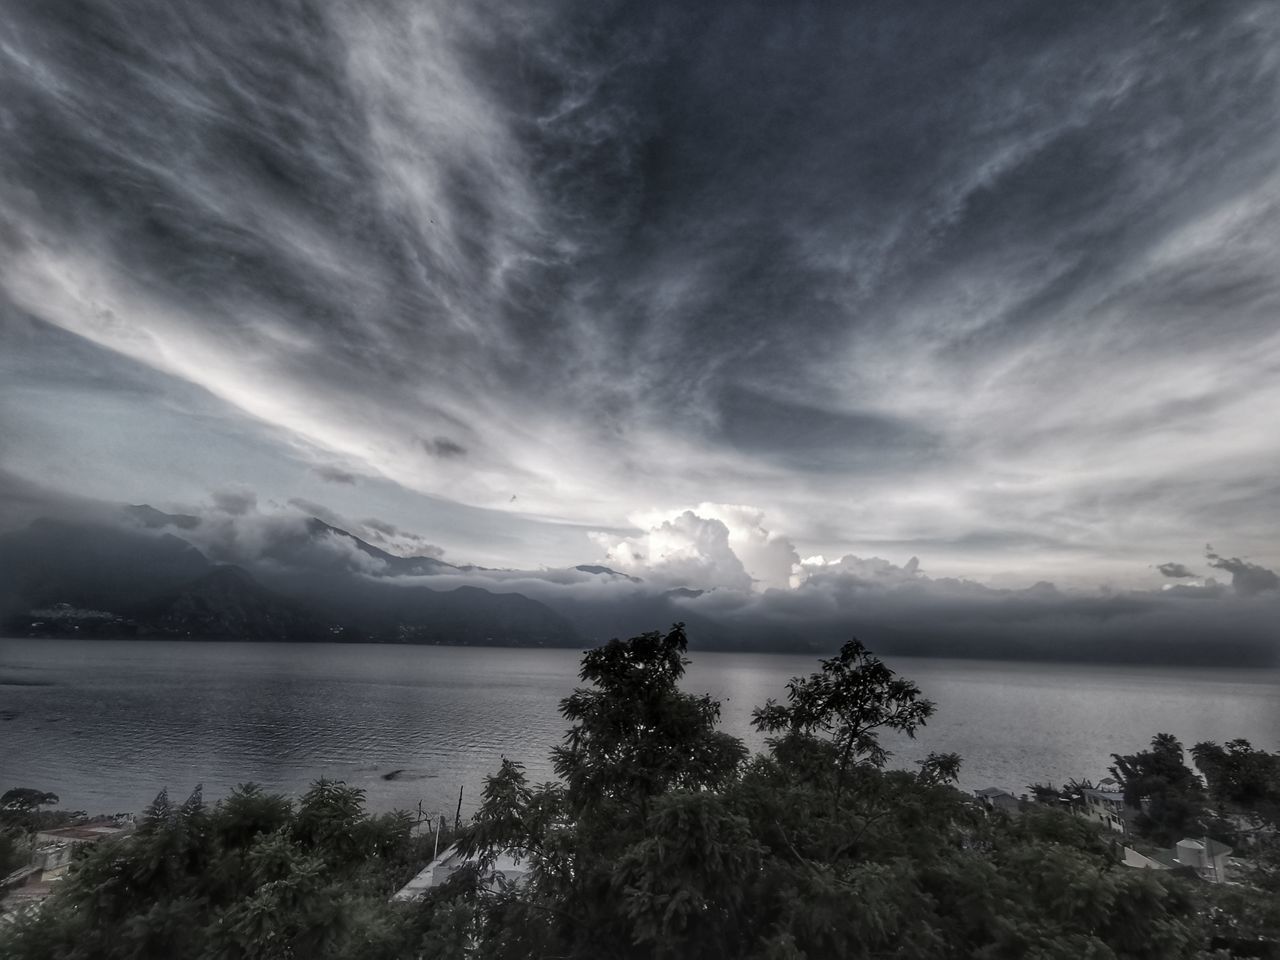 sky, cloud, water, beauty in nature, scenics - nature, tree, nature, environment, horizon, plant, sea, landscape, no people, darkness, tranquility, land, dramatic sky, black and white, storm, tranquil scene, cloudscape, outdoors, mountain, dusk, monochrome, beach, storm cloud, travel destinations, thunderstorm